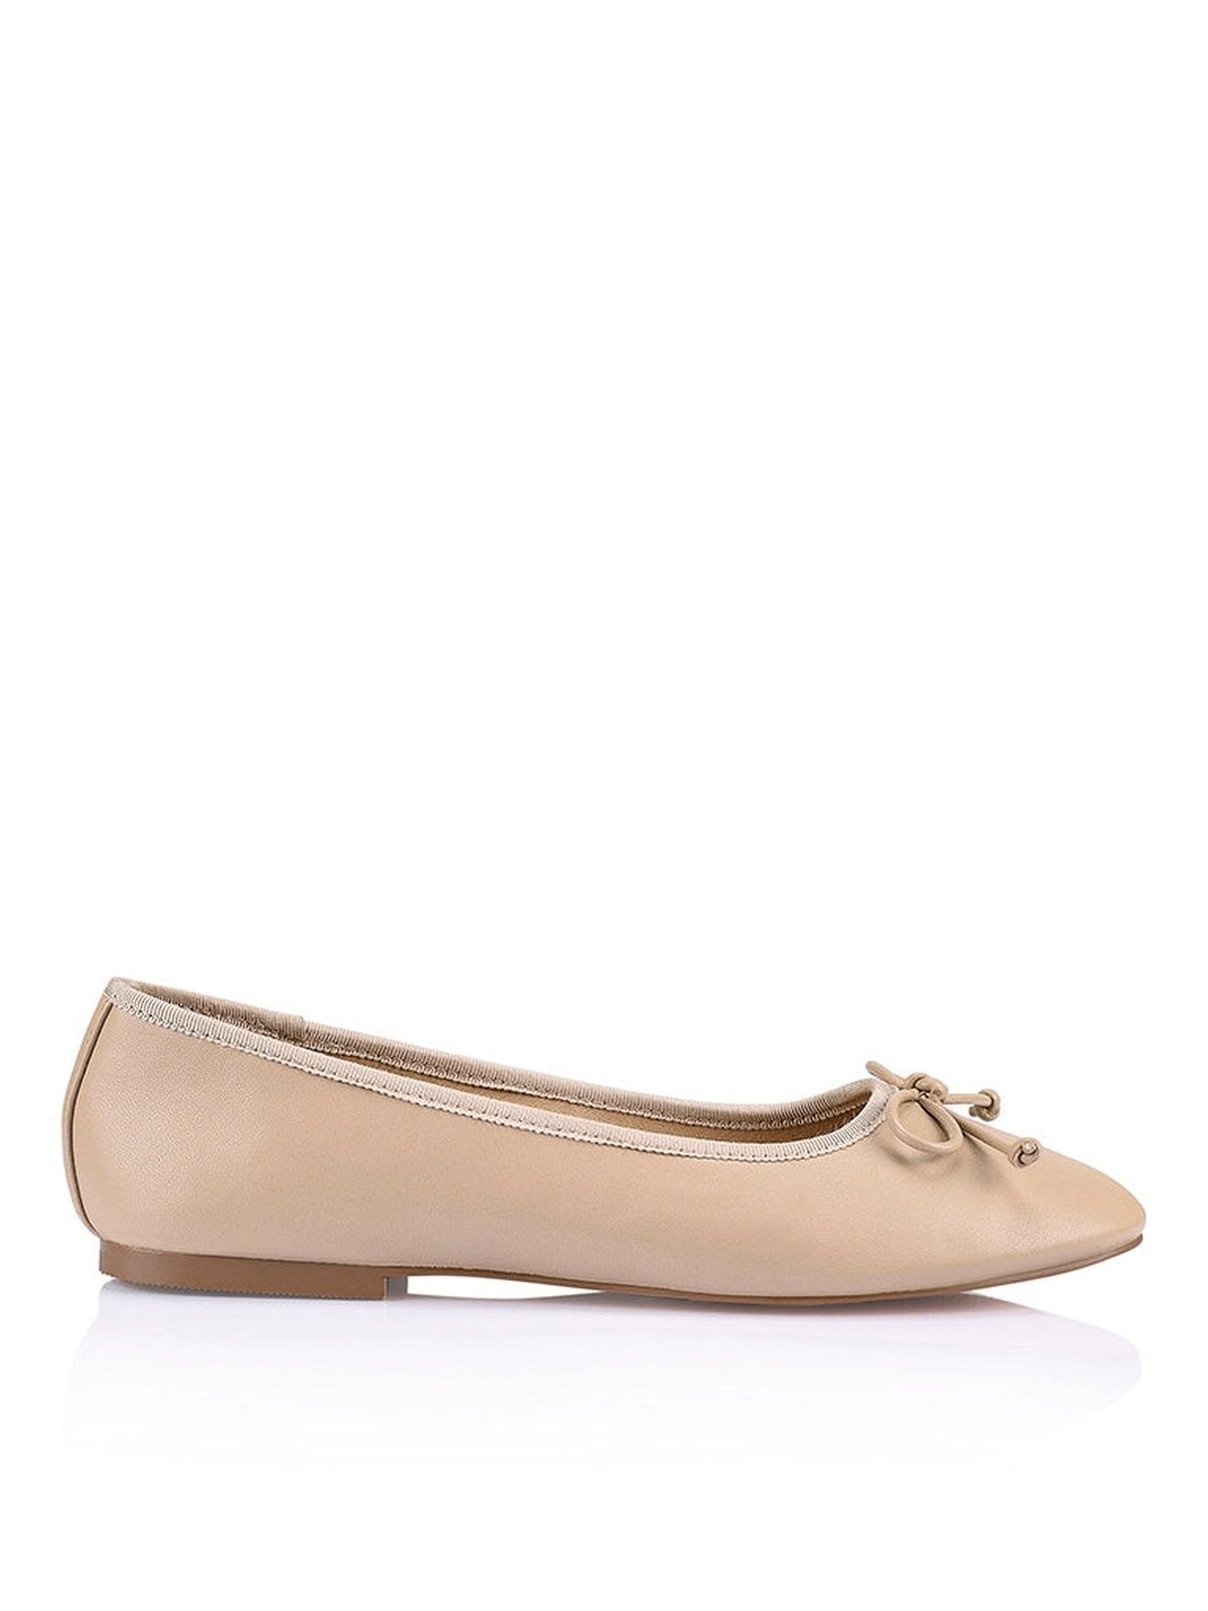 Ballet Flats - Nude Leather